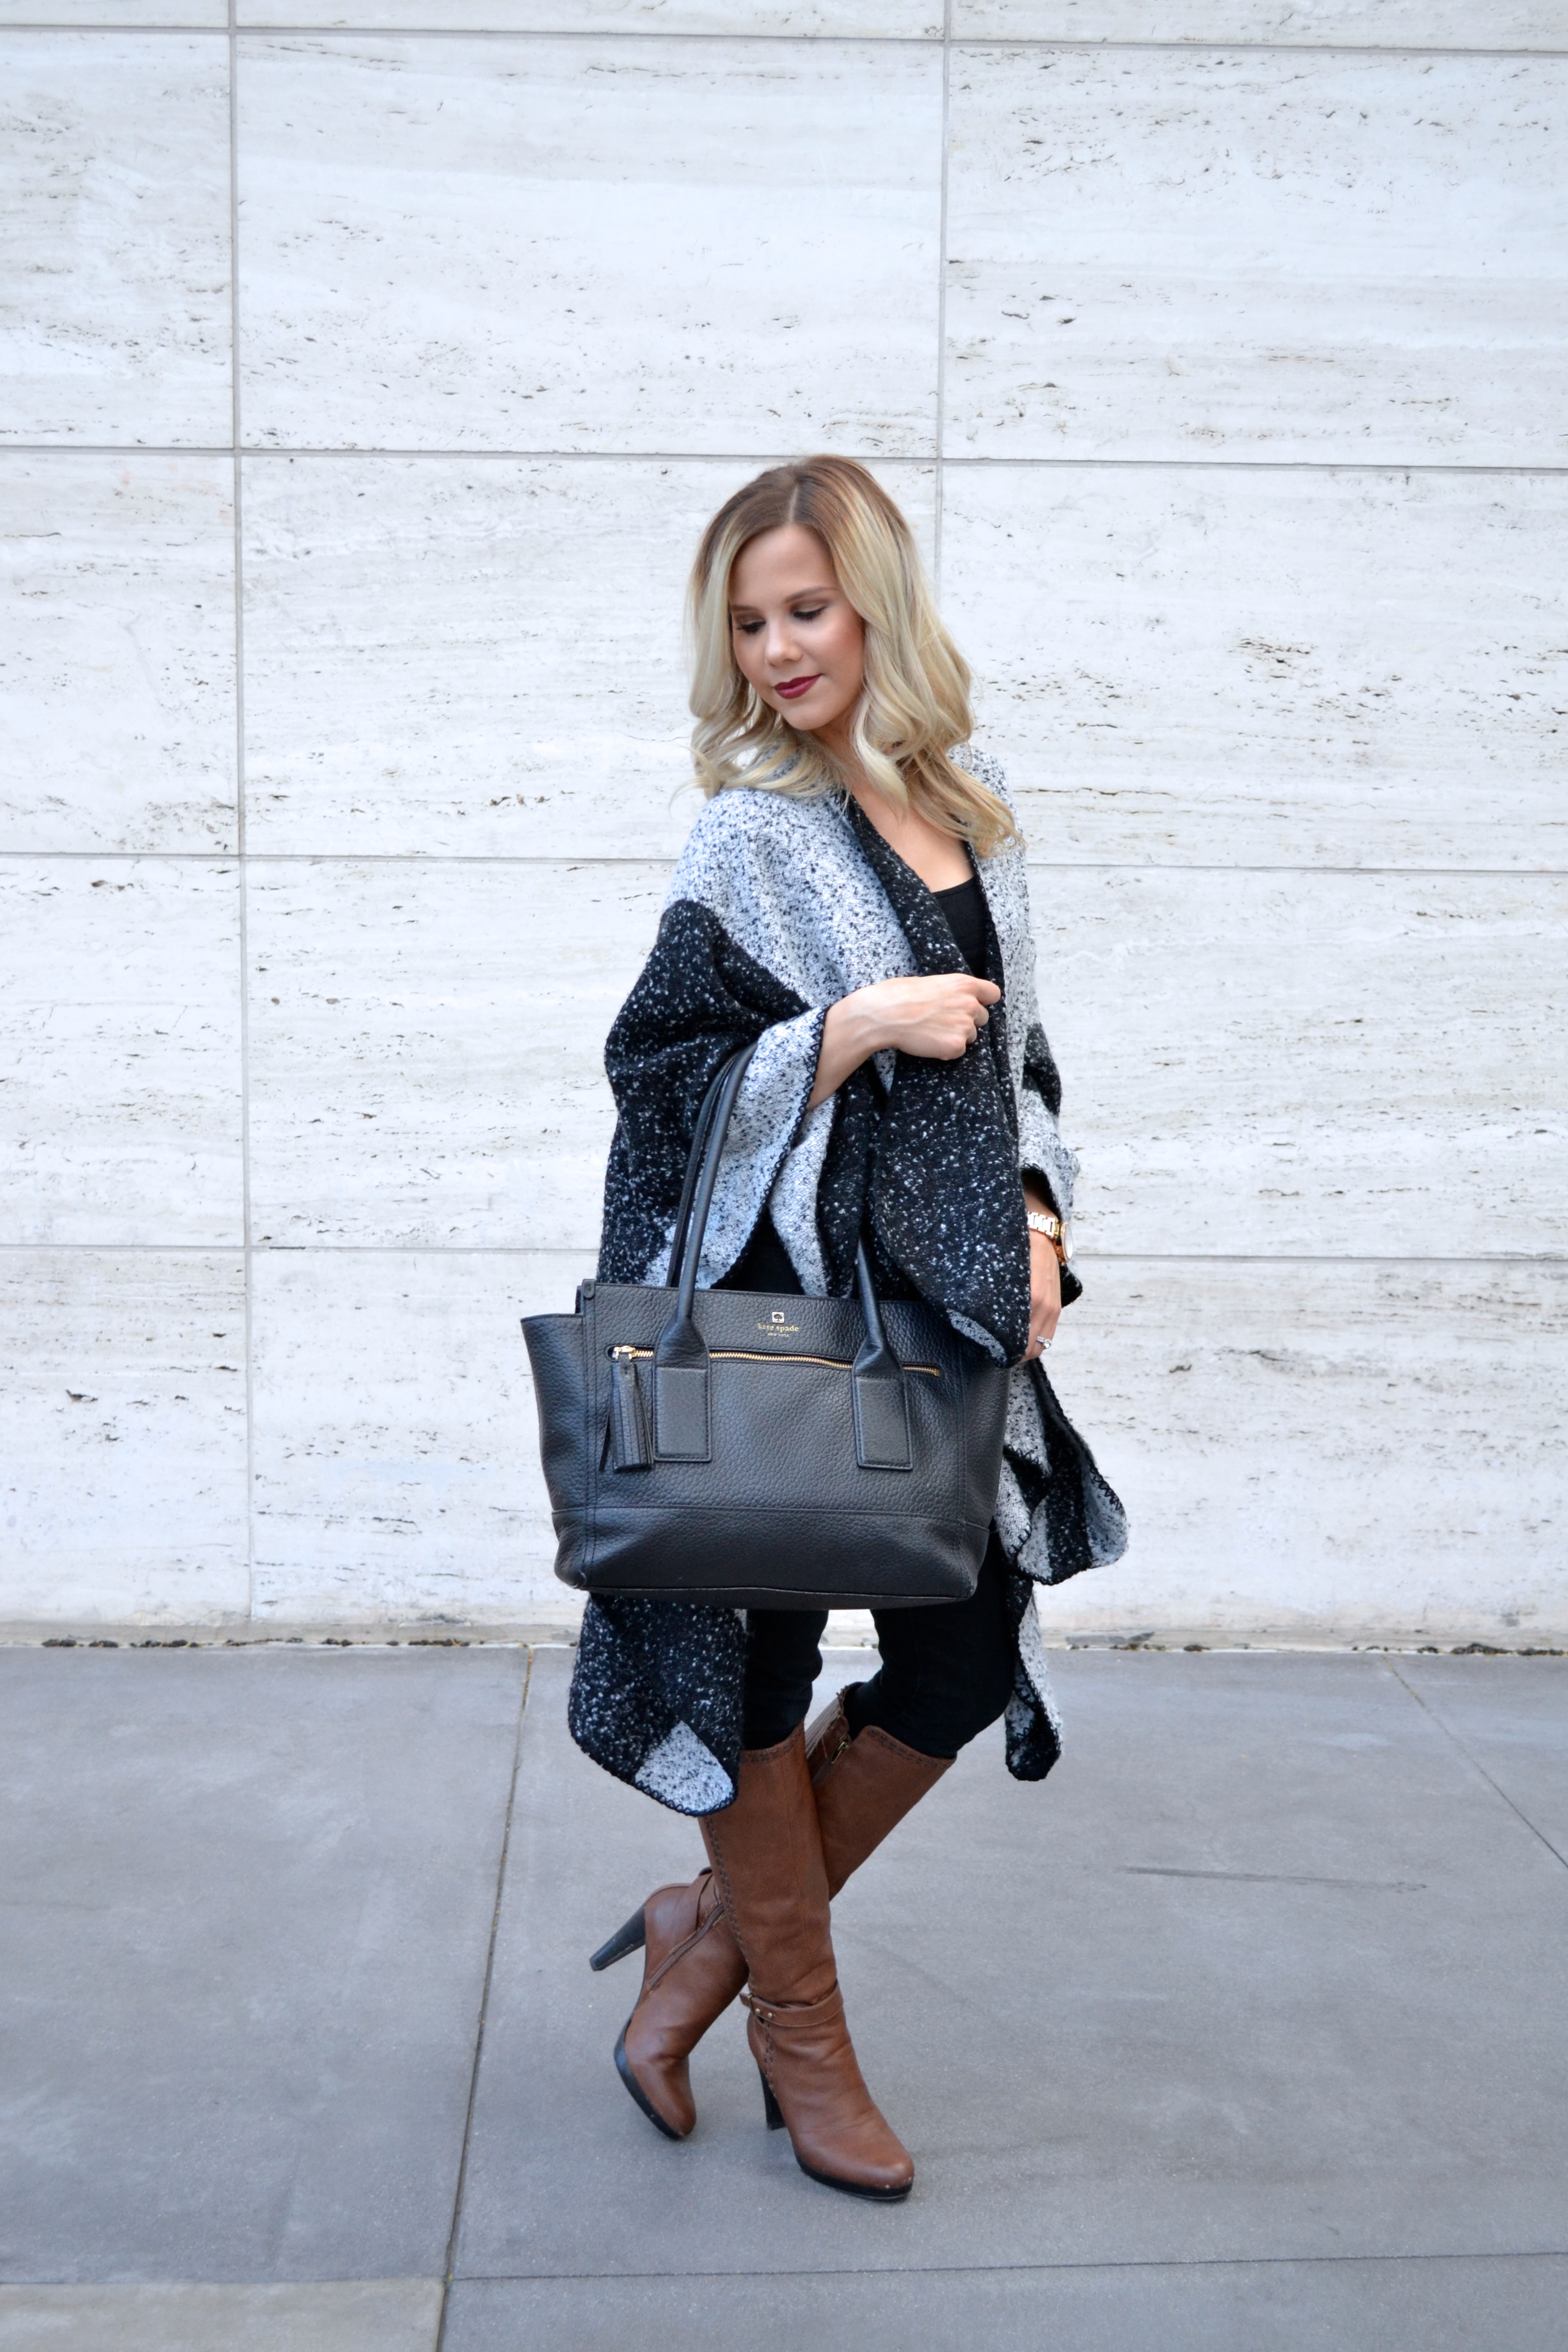 black and grey poncho, black jeans, boots, and Black Kate Spade Tote